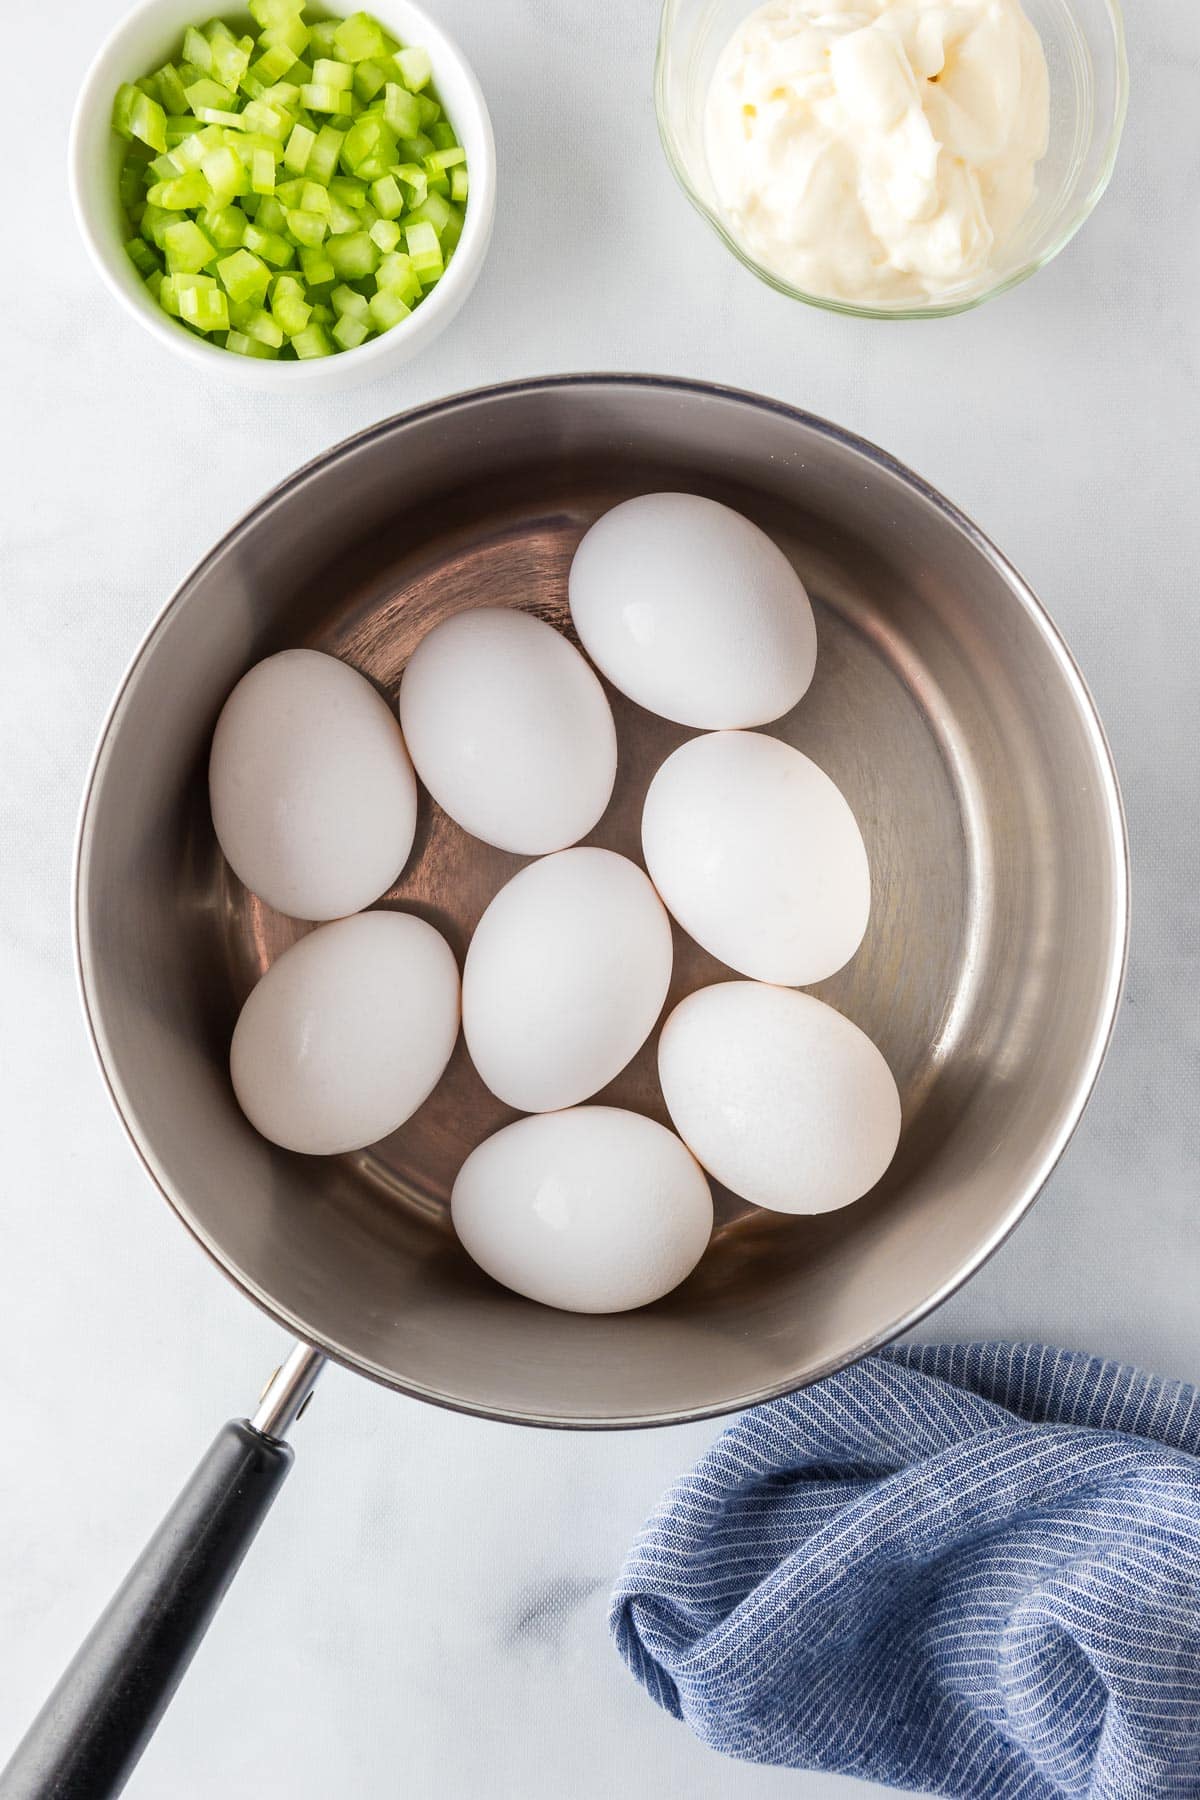 A pot containing white eggs in shells on a countertop with celery and mayonnaise nearby in bowls.